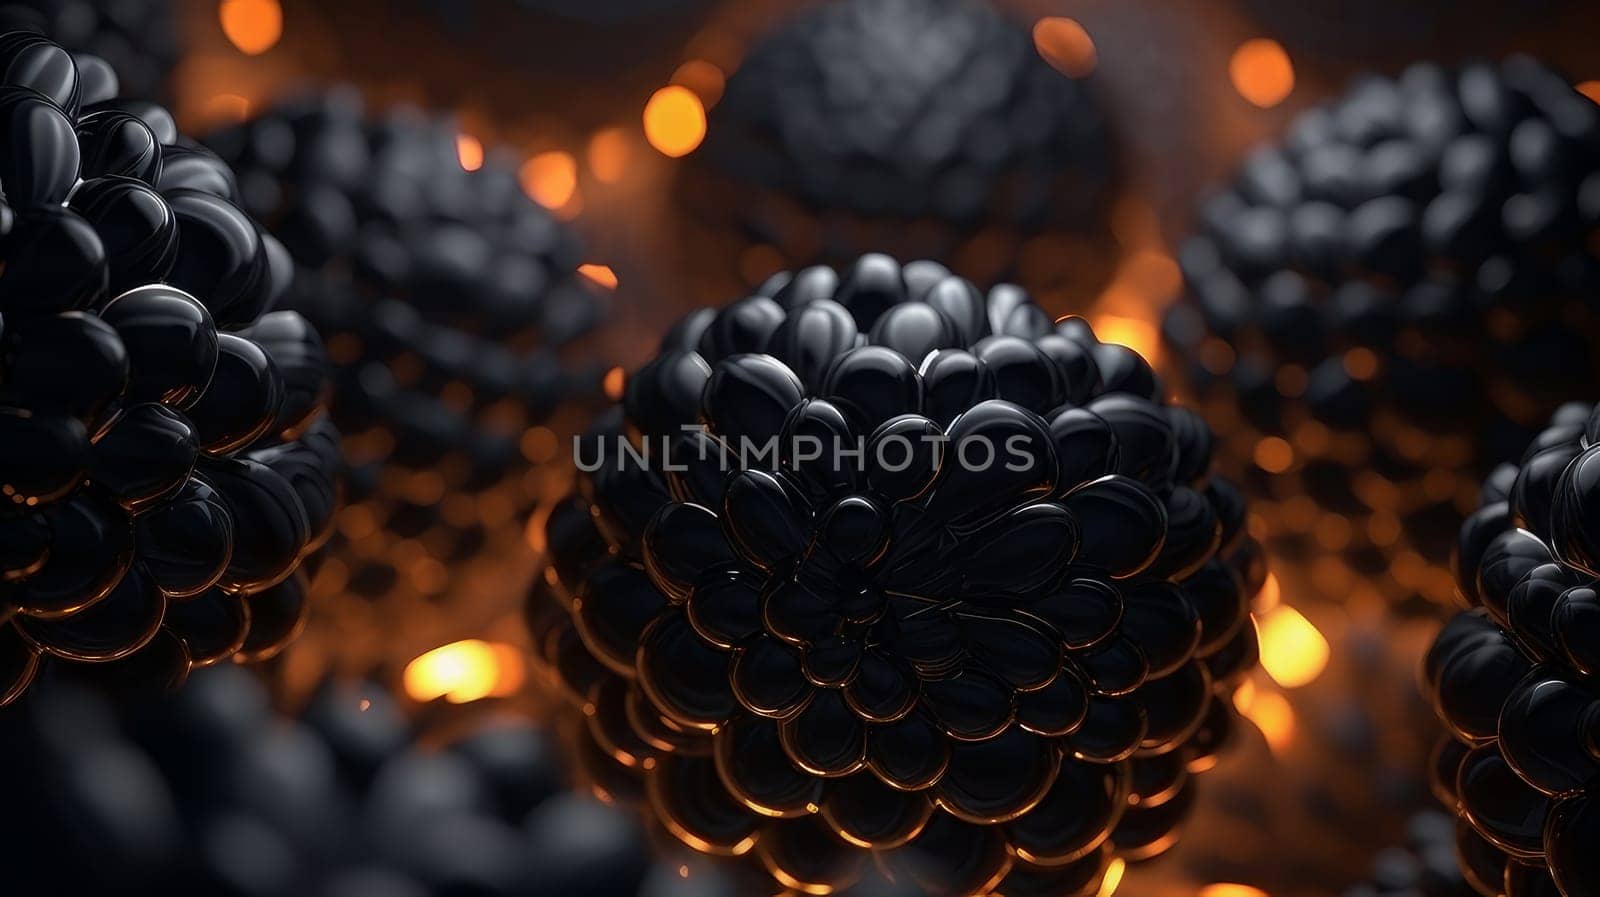 Beautiful luxury creative 3D modern abstract background consisting of black flowers, balls and spheres with light digital effect, copy space